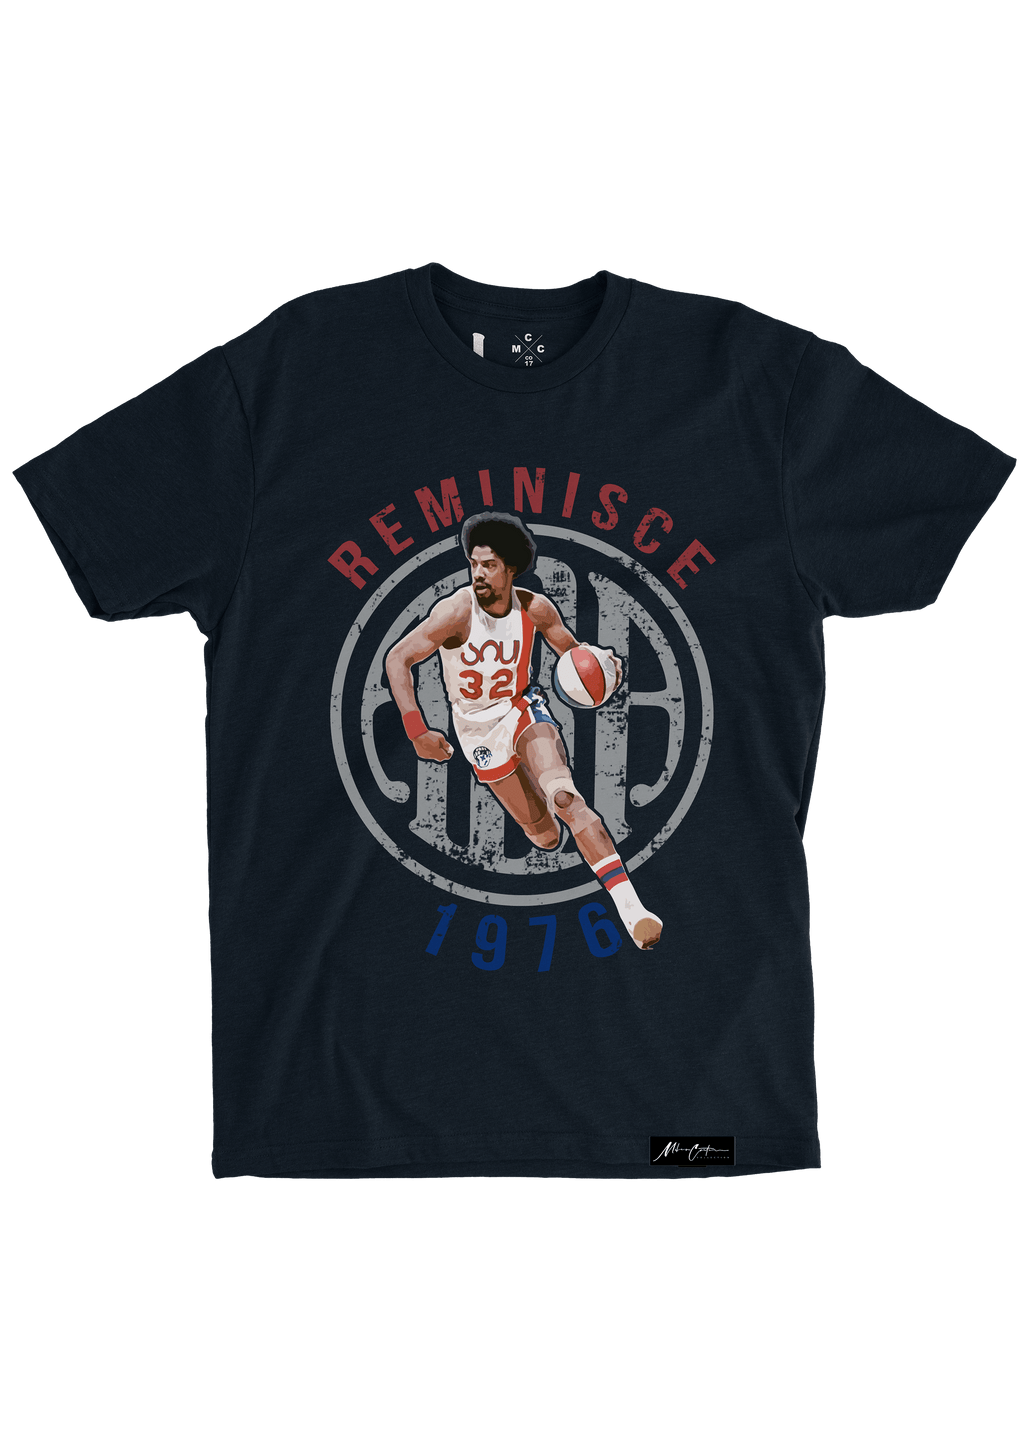 Miles Carter Designs Shirt S DR J - 1976 ABA All-Star (Nt)